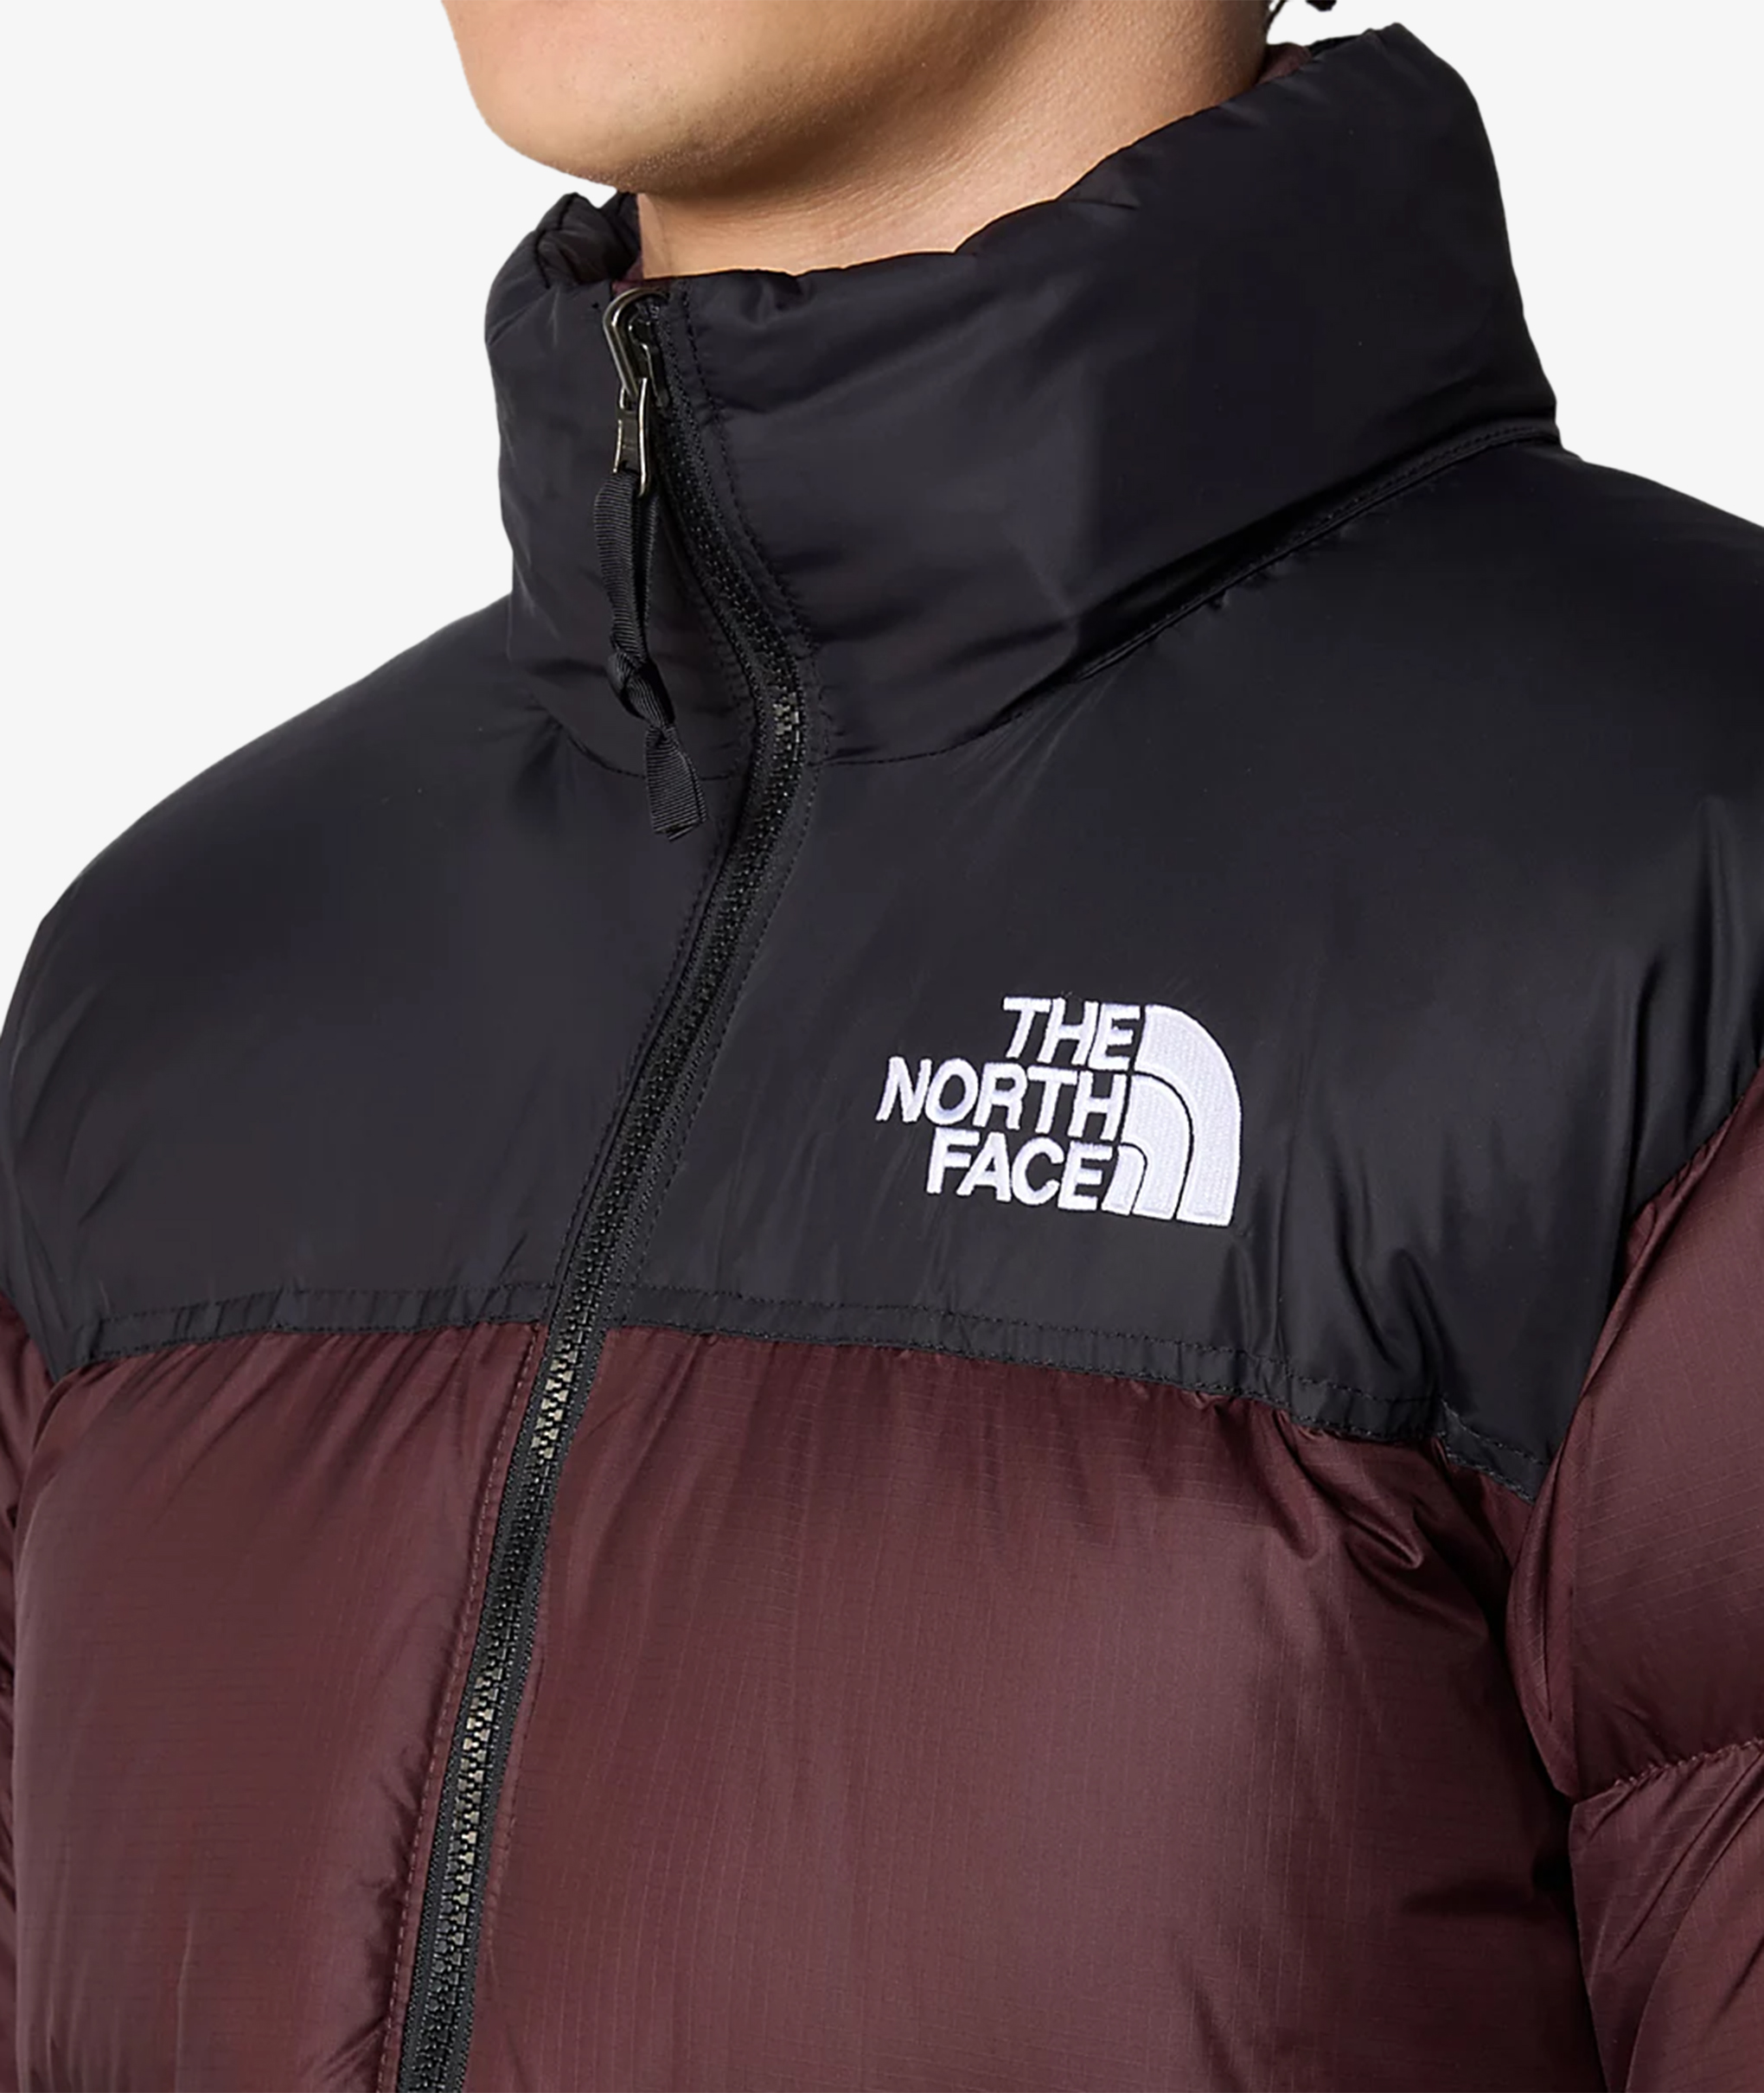 Norse Store  Shipping Worldwide - The North Face HP Nuptse Jacket